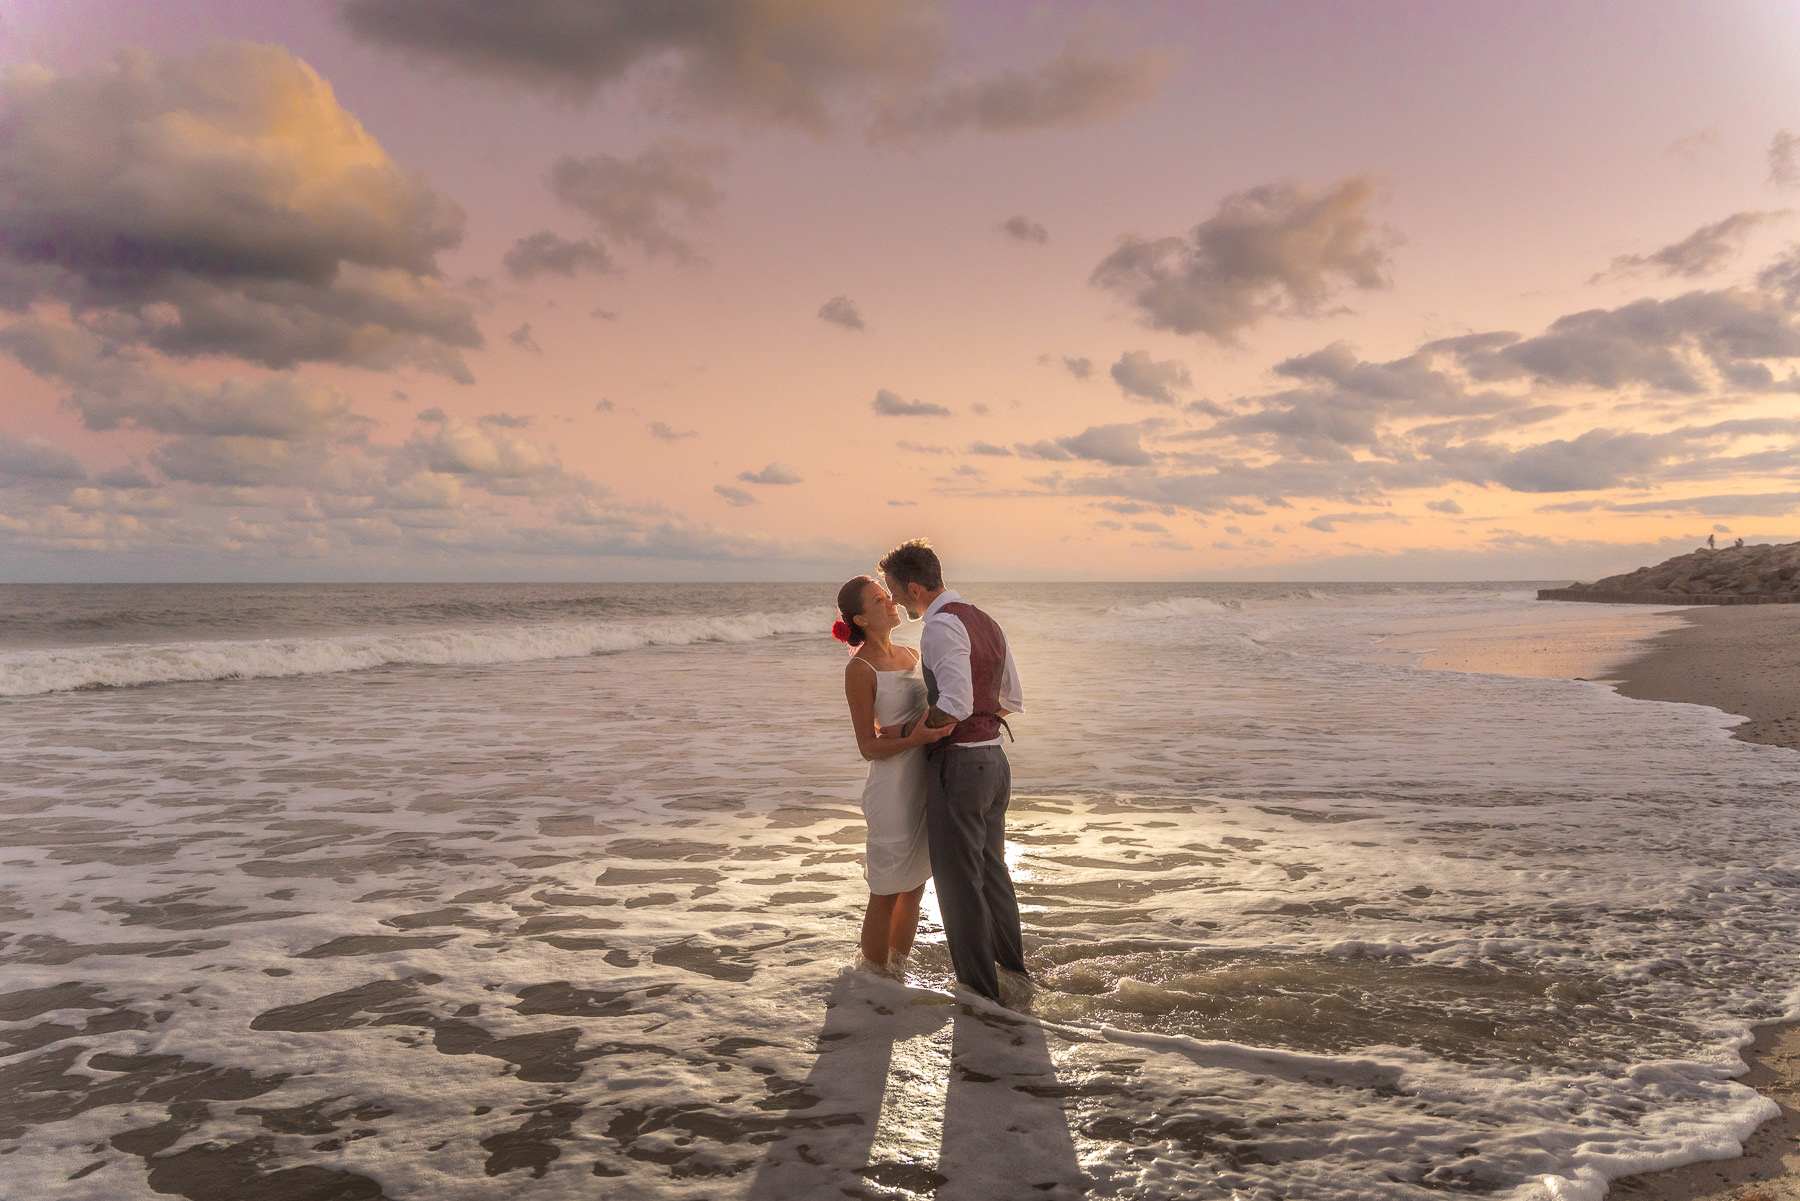 weding- fort fisher nc wedding photograpahers - chris lang photography - bride and groom in the beach waves at Ft Fisher